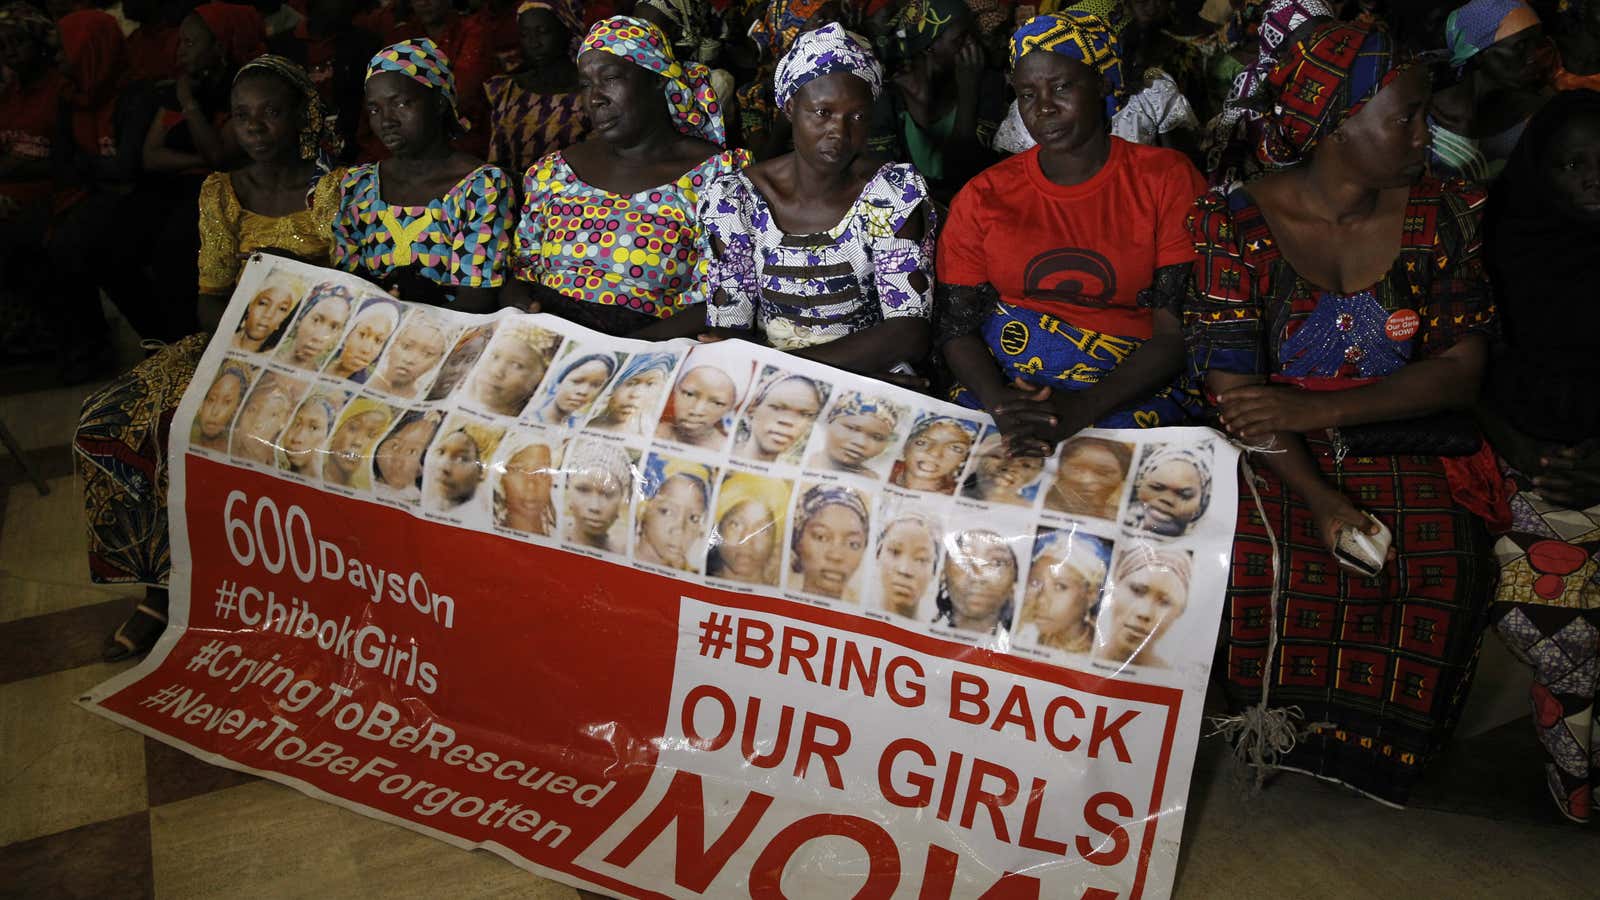 The Victim Protection of Fund will be aimed at helping families affected by Boko Haram.